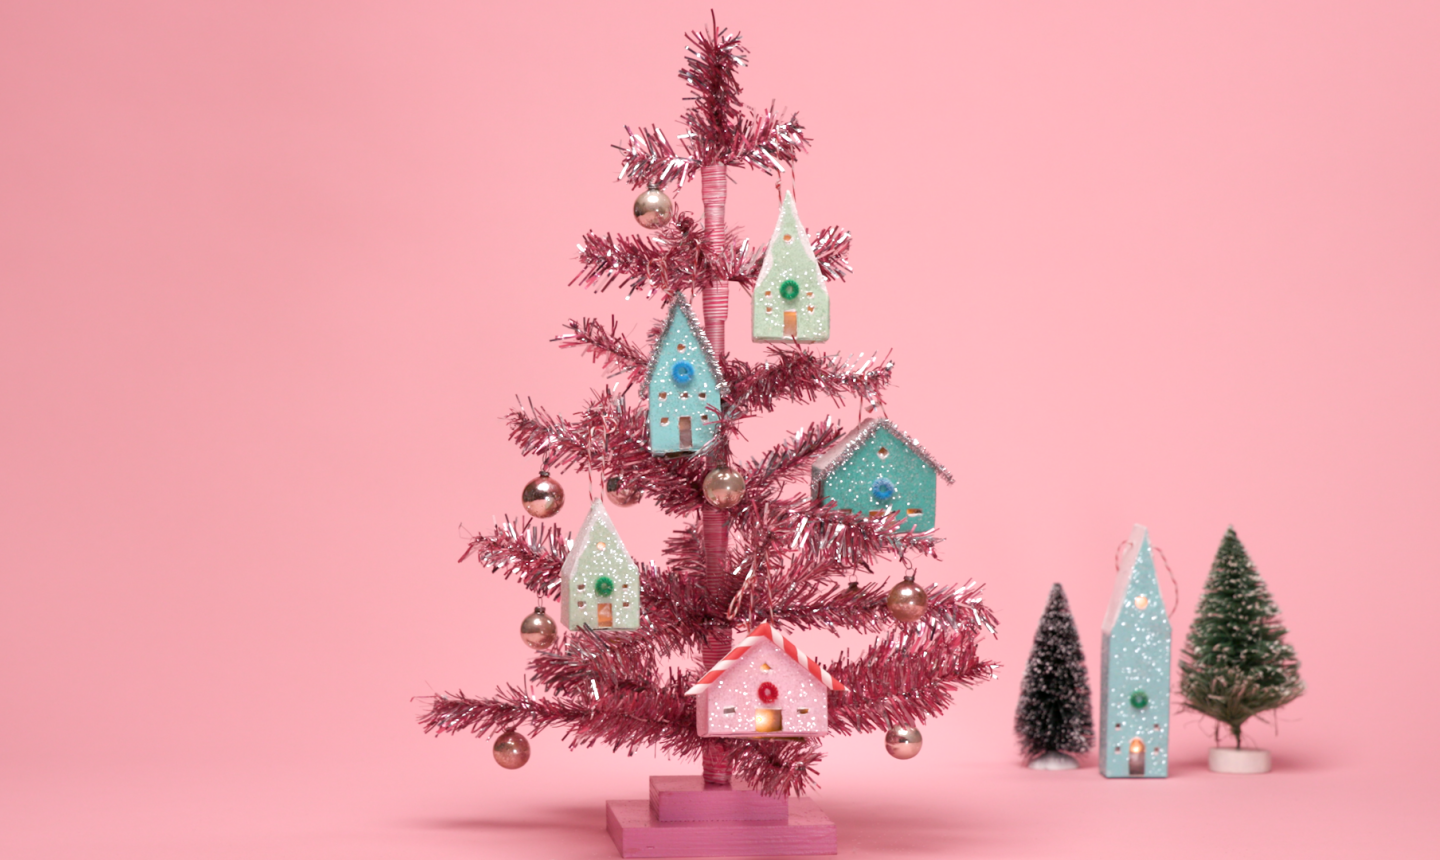 light up house ornaments on pink tree